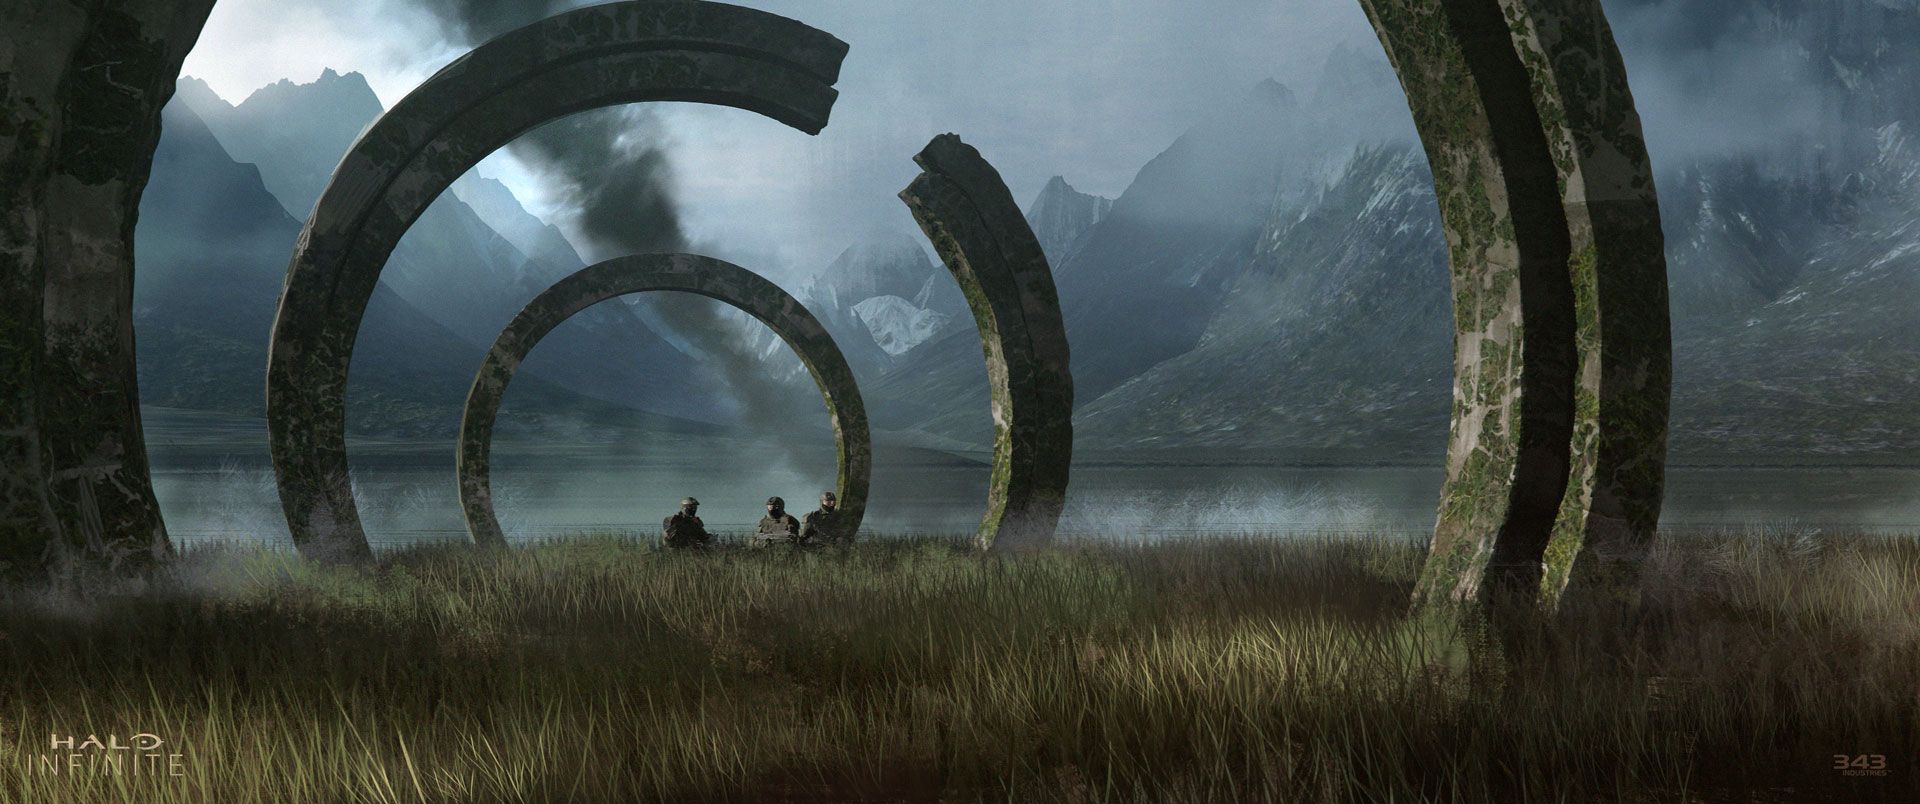 Industries Reveal Halo Infinite Artwork And They Look Amazing